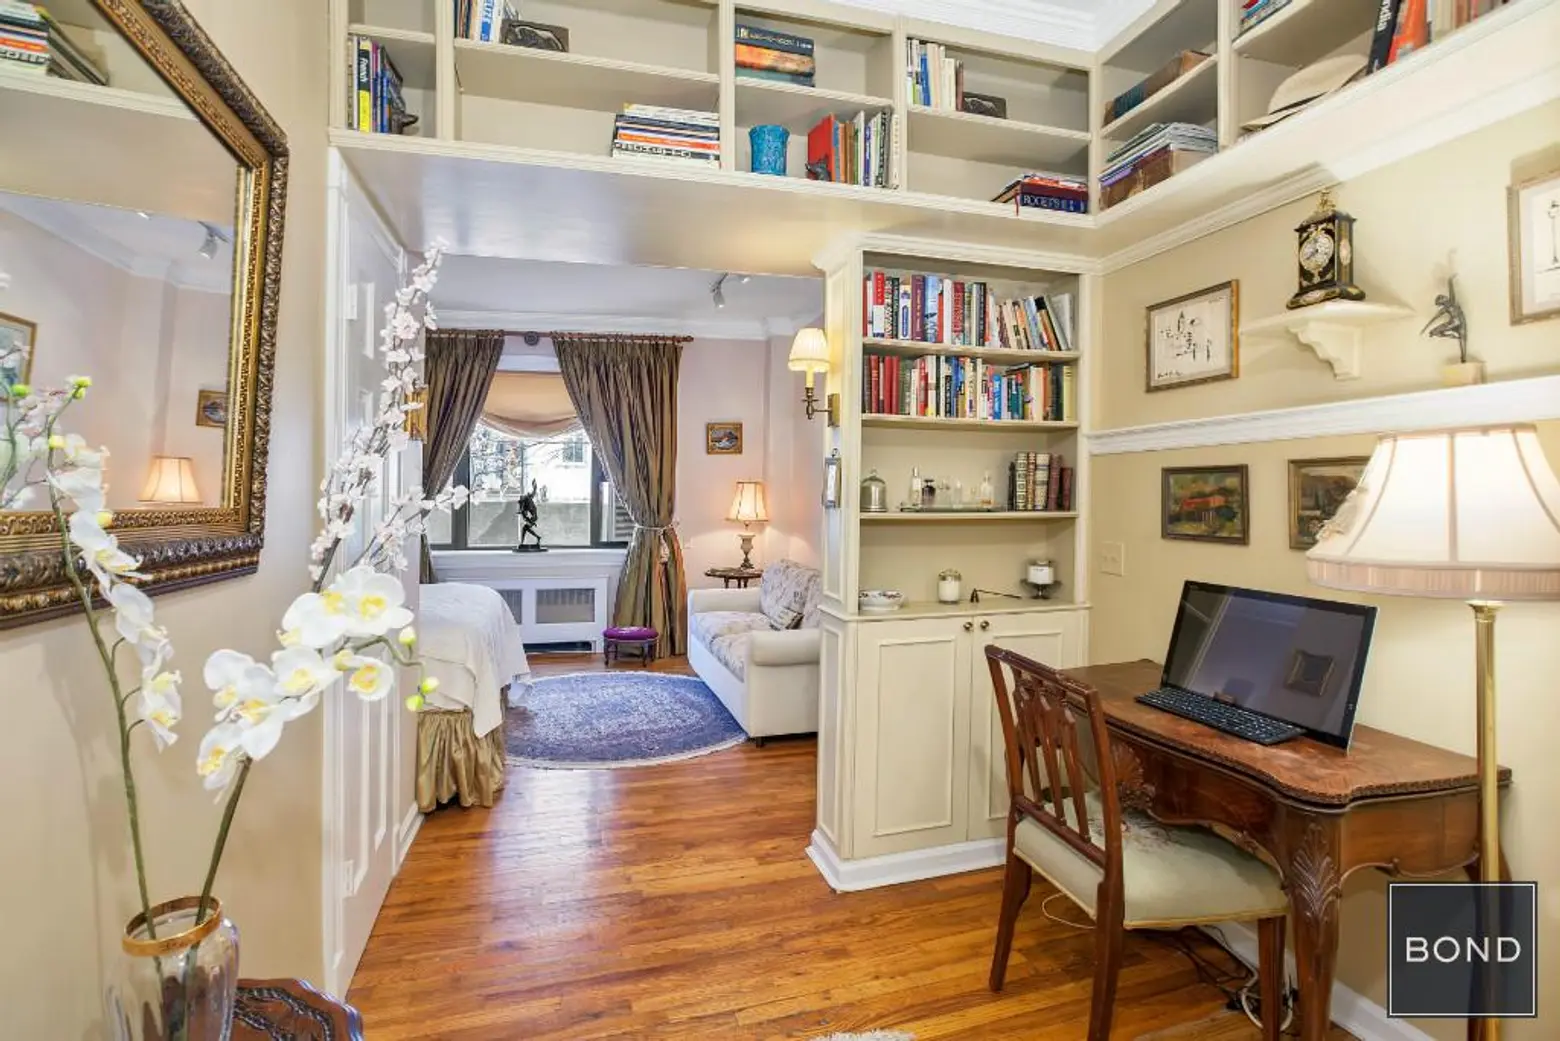 Though Pint-Sized and Pricey, This $1.15M Village Studio Has Tons of Charm and Storage